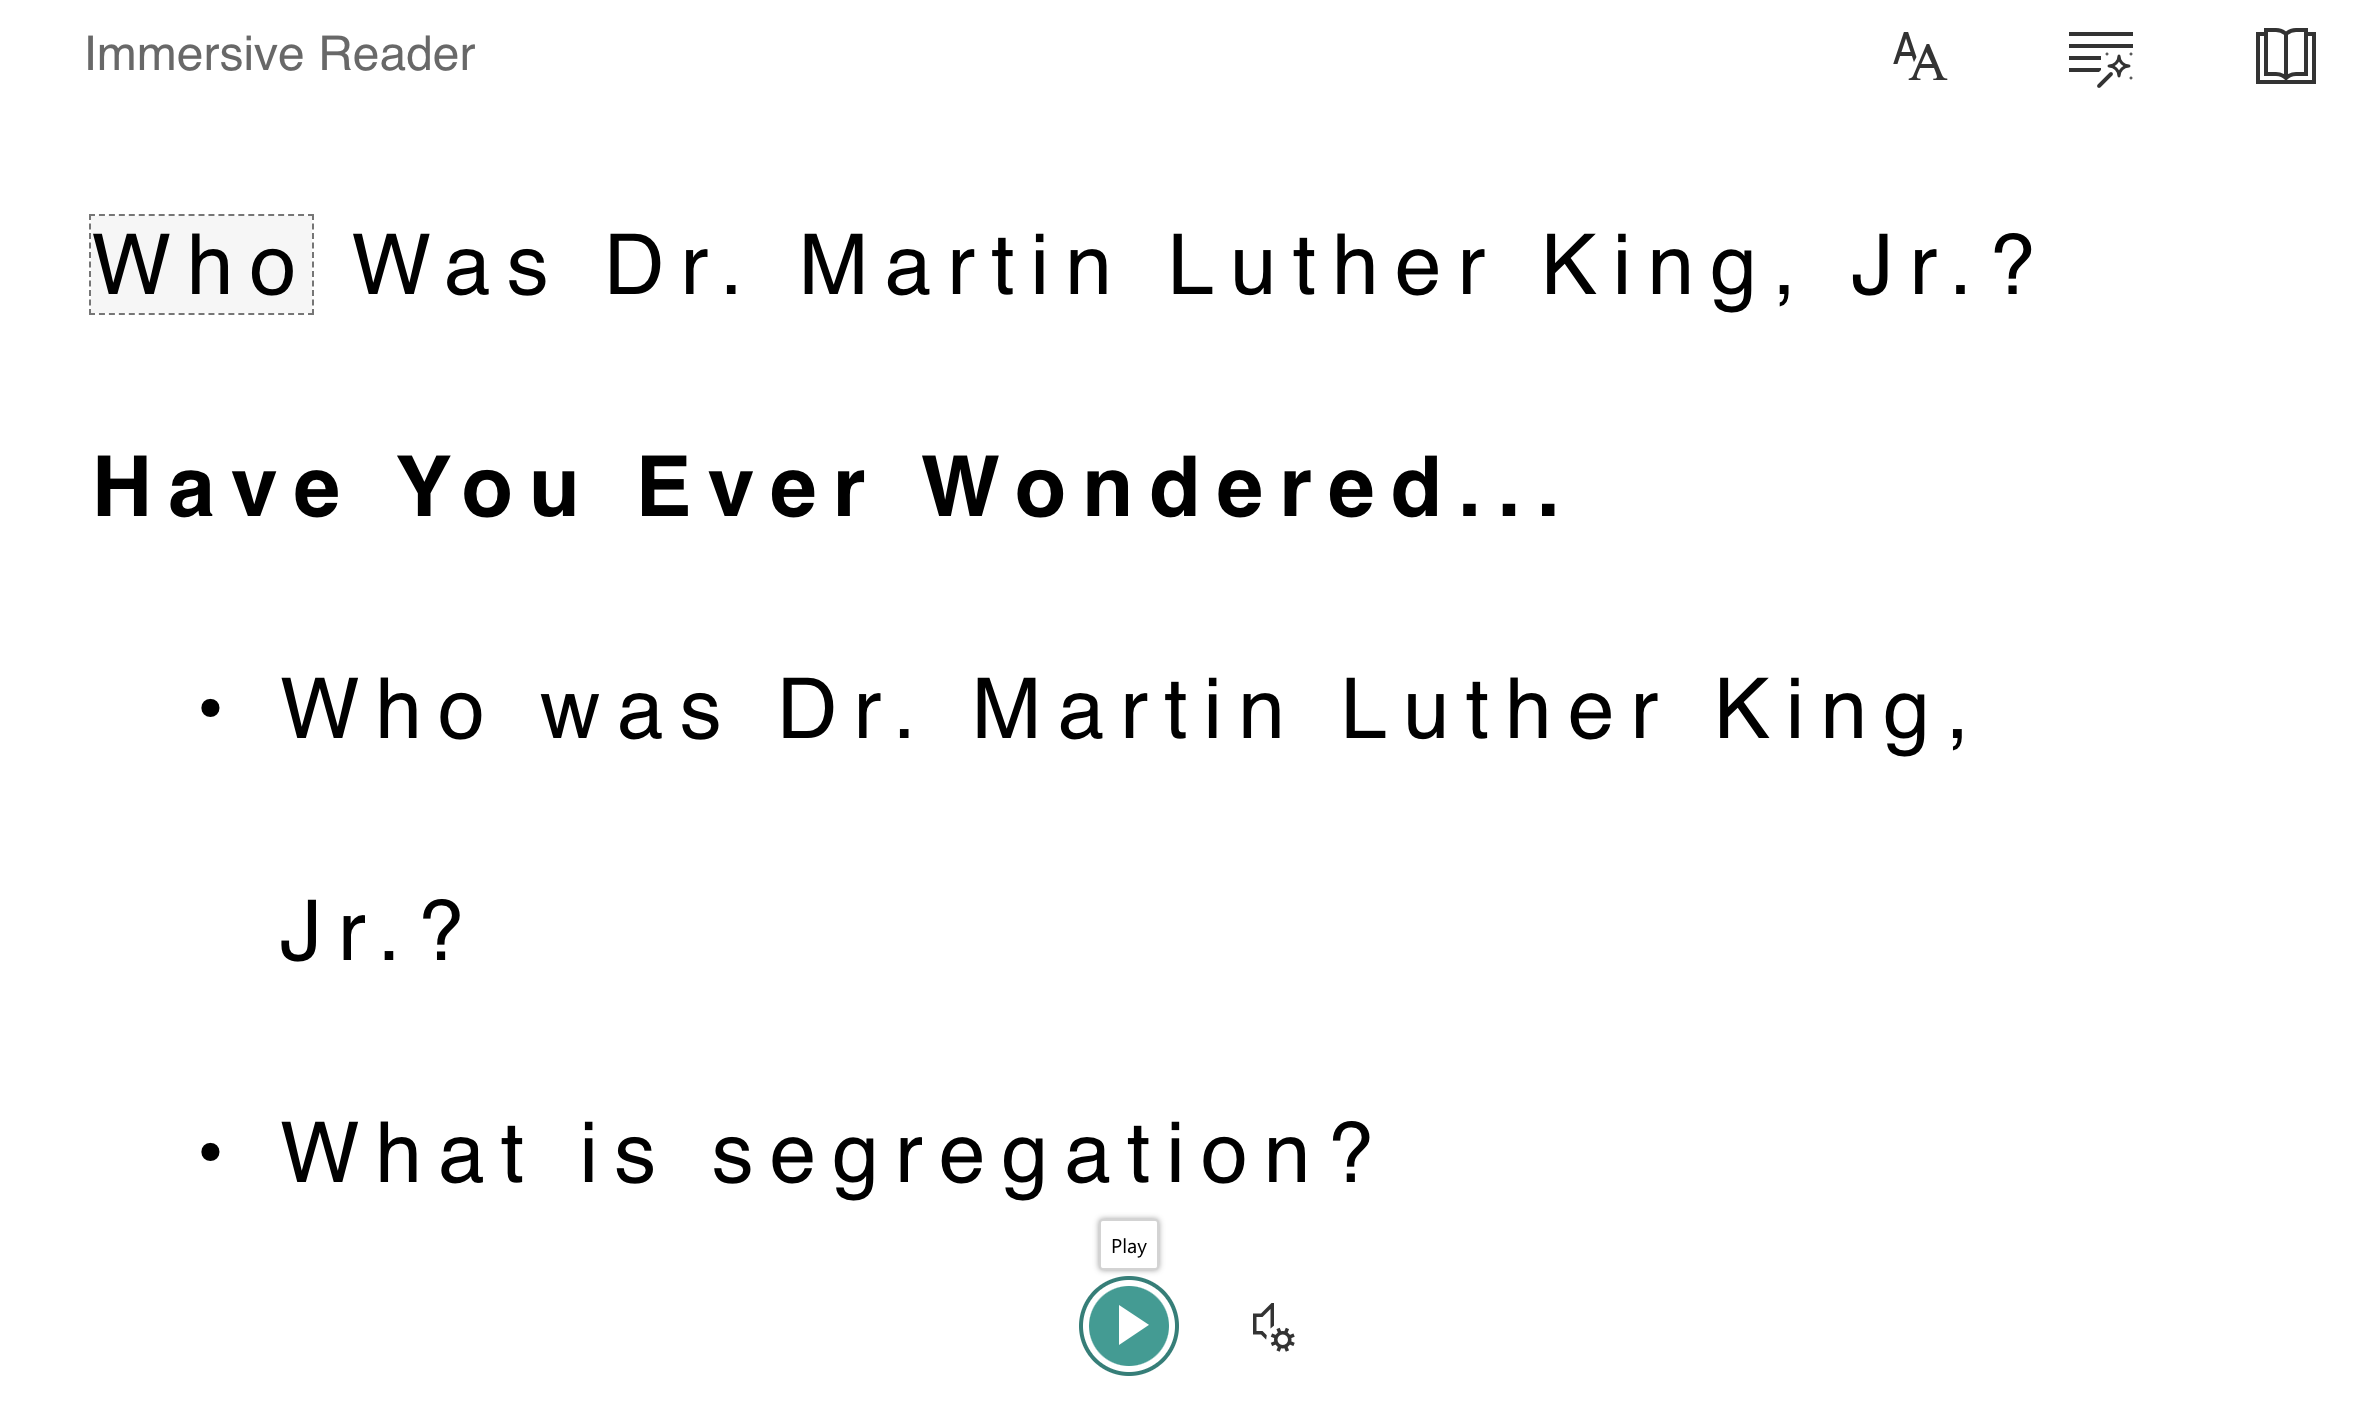 The read aloud feature in Immersive Reader with the “Who Was Dr. Martin Luther King, Jr.?” Wonderopolis article.  